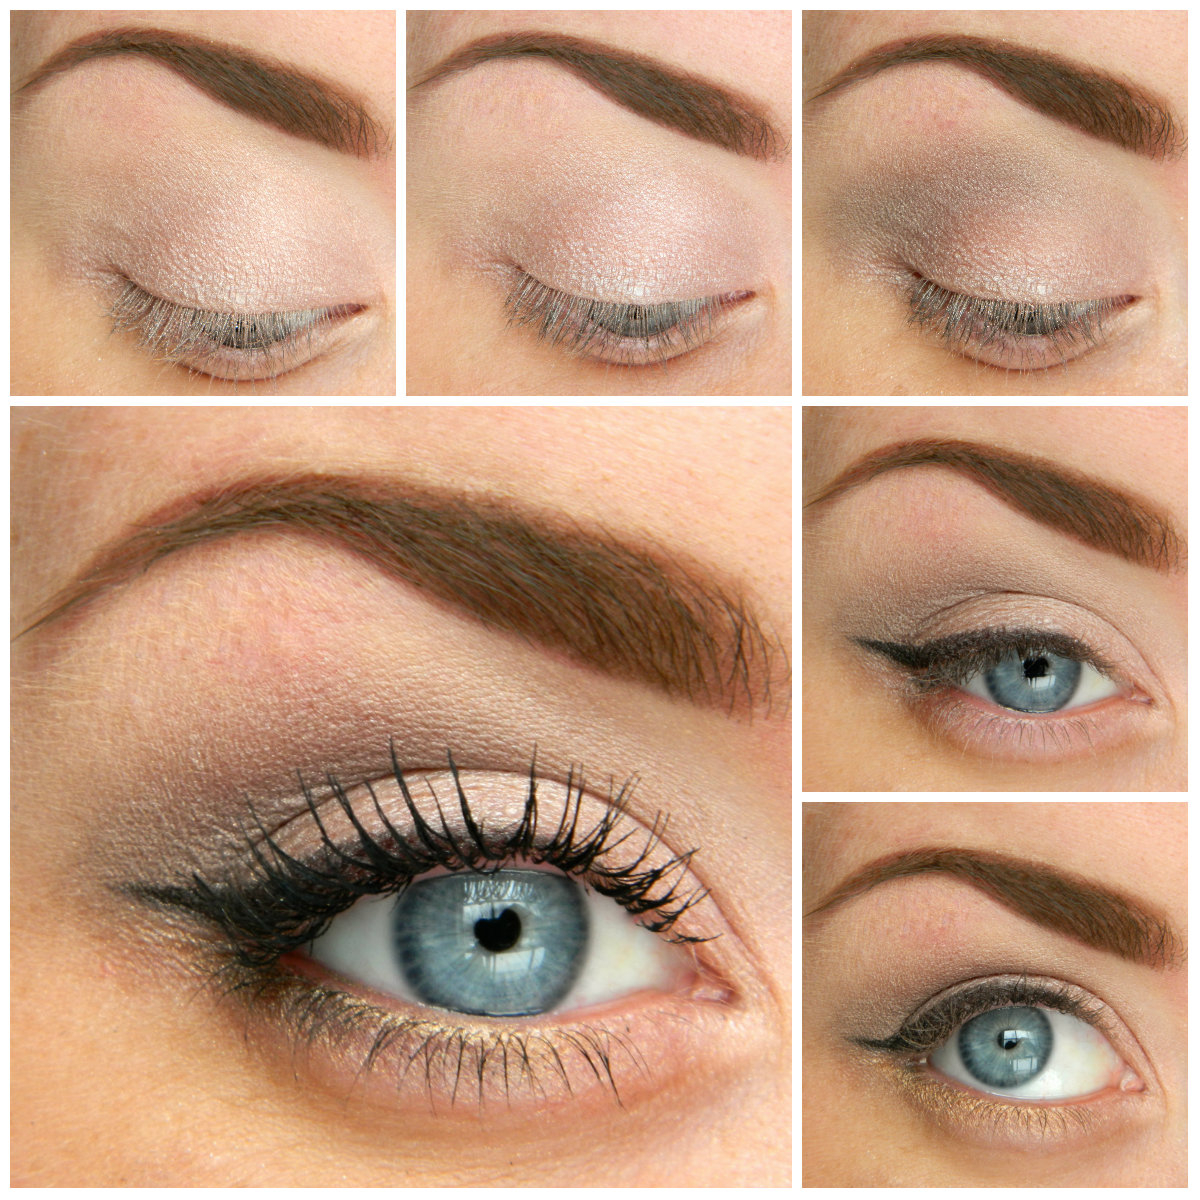 Eye Makeup Ideas For Blue Eyes 5 Ways To Make Blue Eyes Pop With Proper Eye Makeup Her Style Code